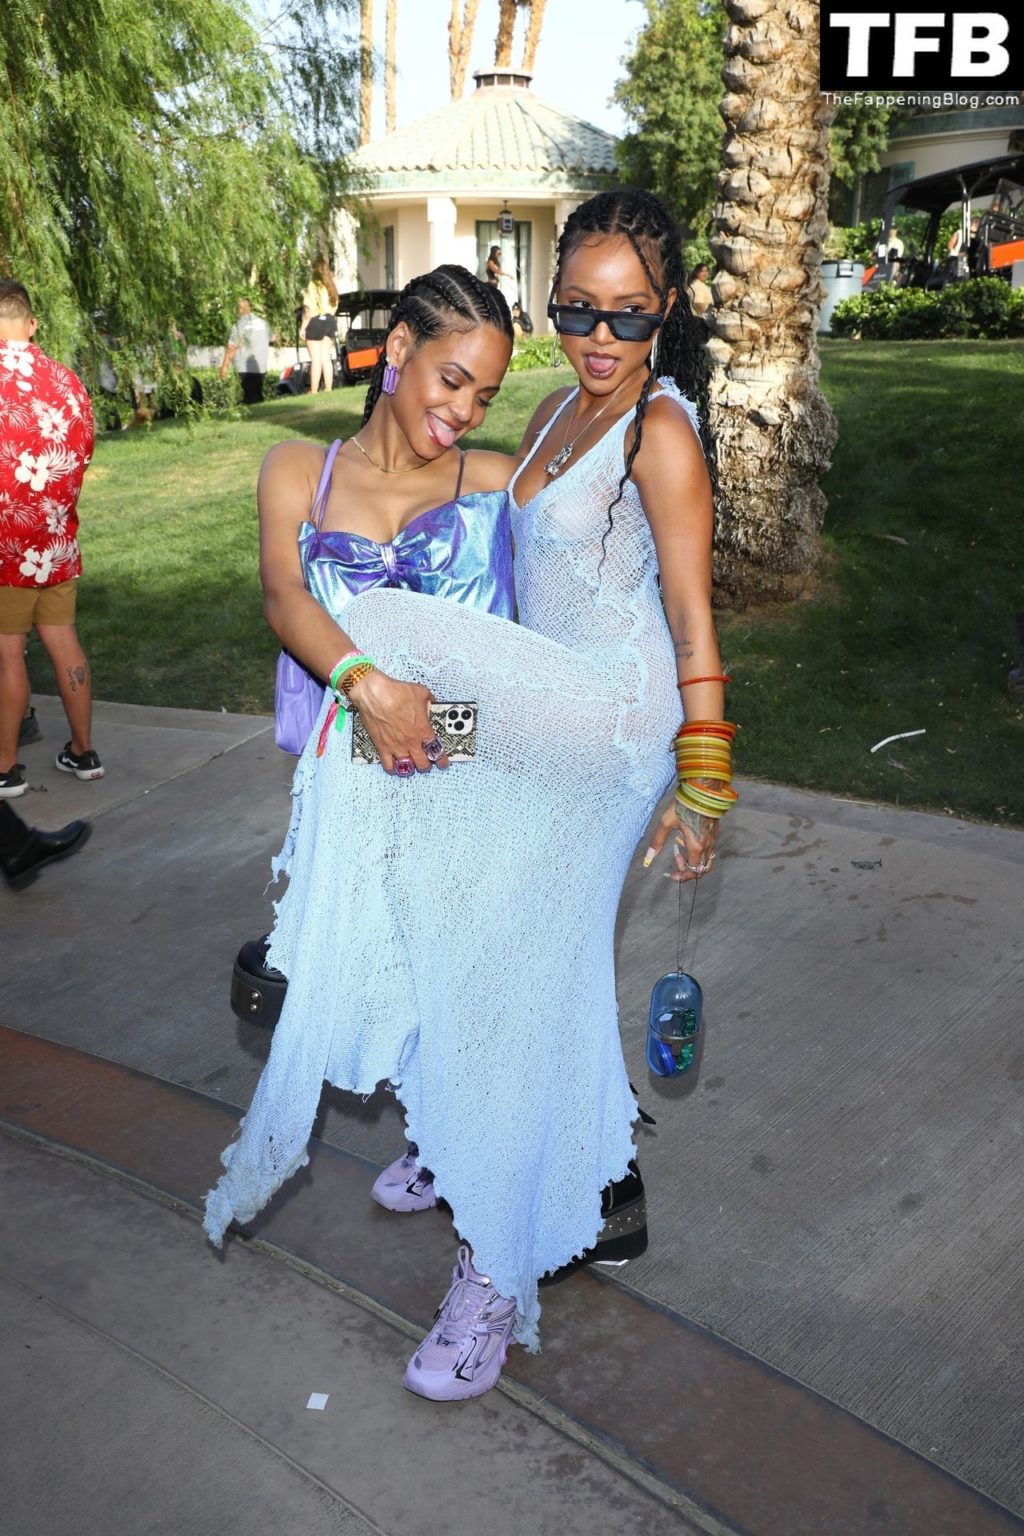 Karrueche Tran Shows Her Nude Tits as She Steps Out at Revolve Fest During Coachella (82 Photos)